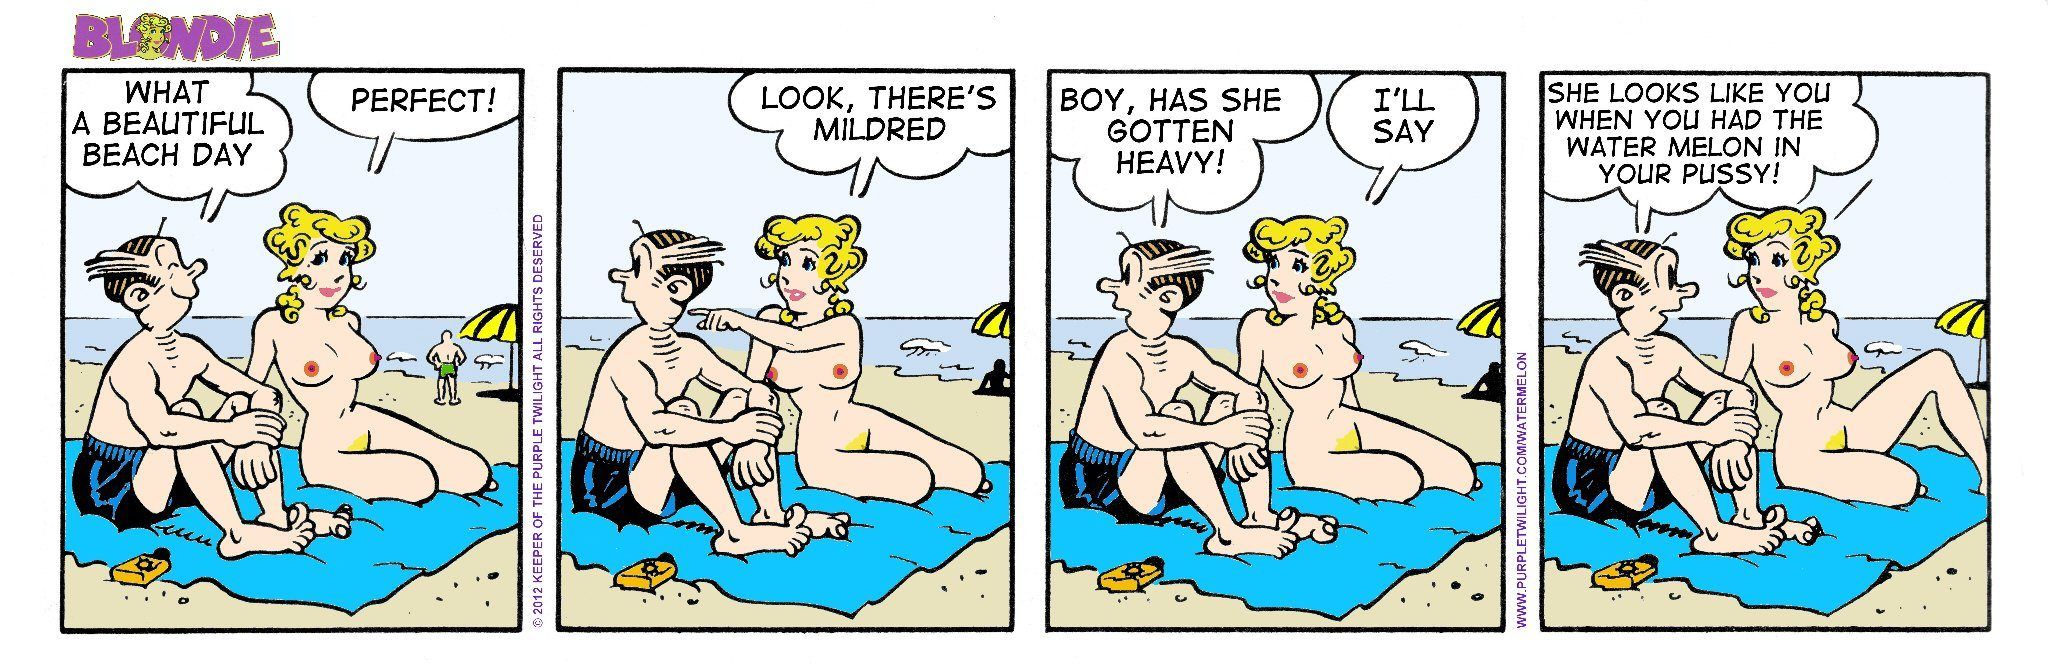 Blondie and dagwood cartoon porn pictures Porno pics hot. hq nude image